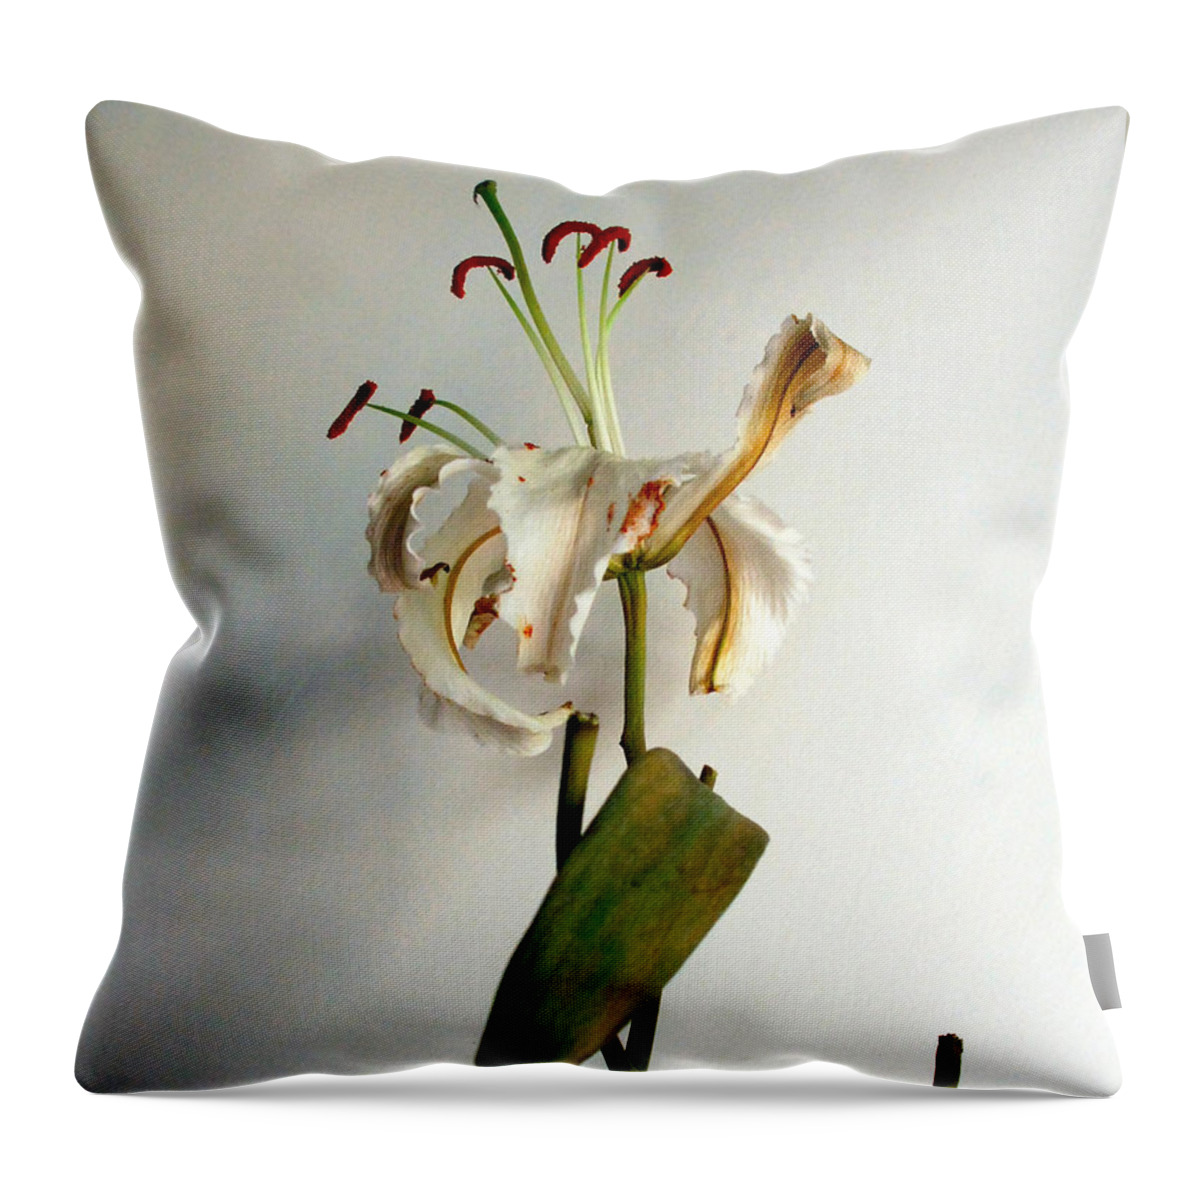 Flowers Throw Pillow featuring the photograph Last Moments by Pravine Chester